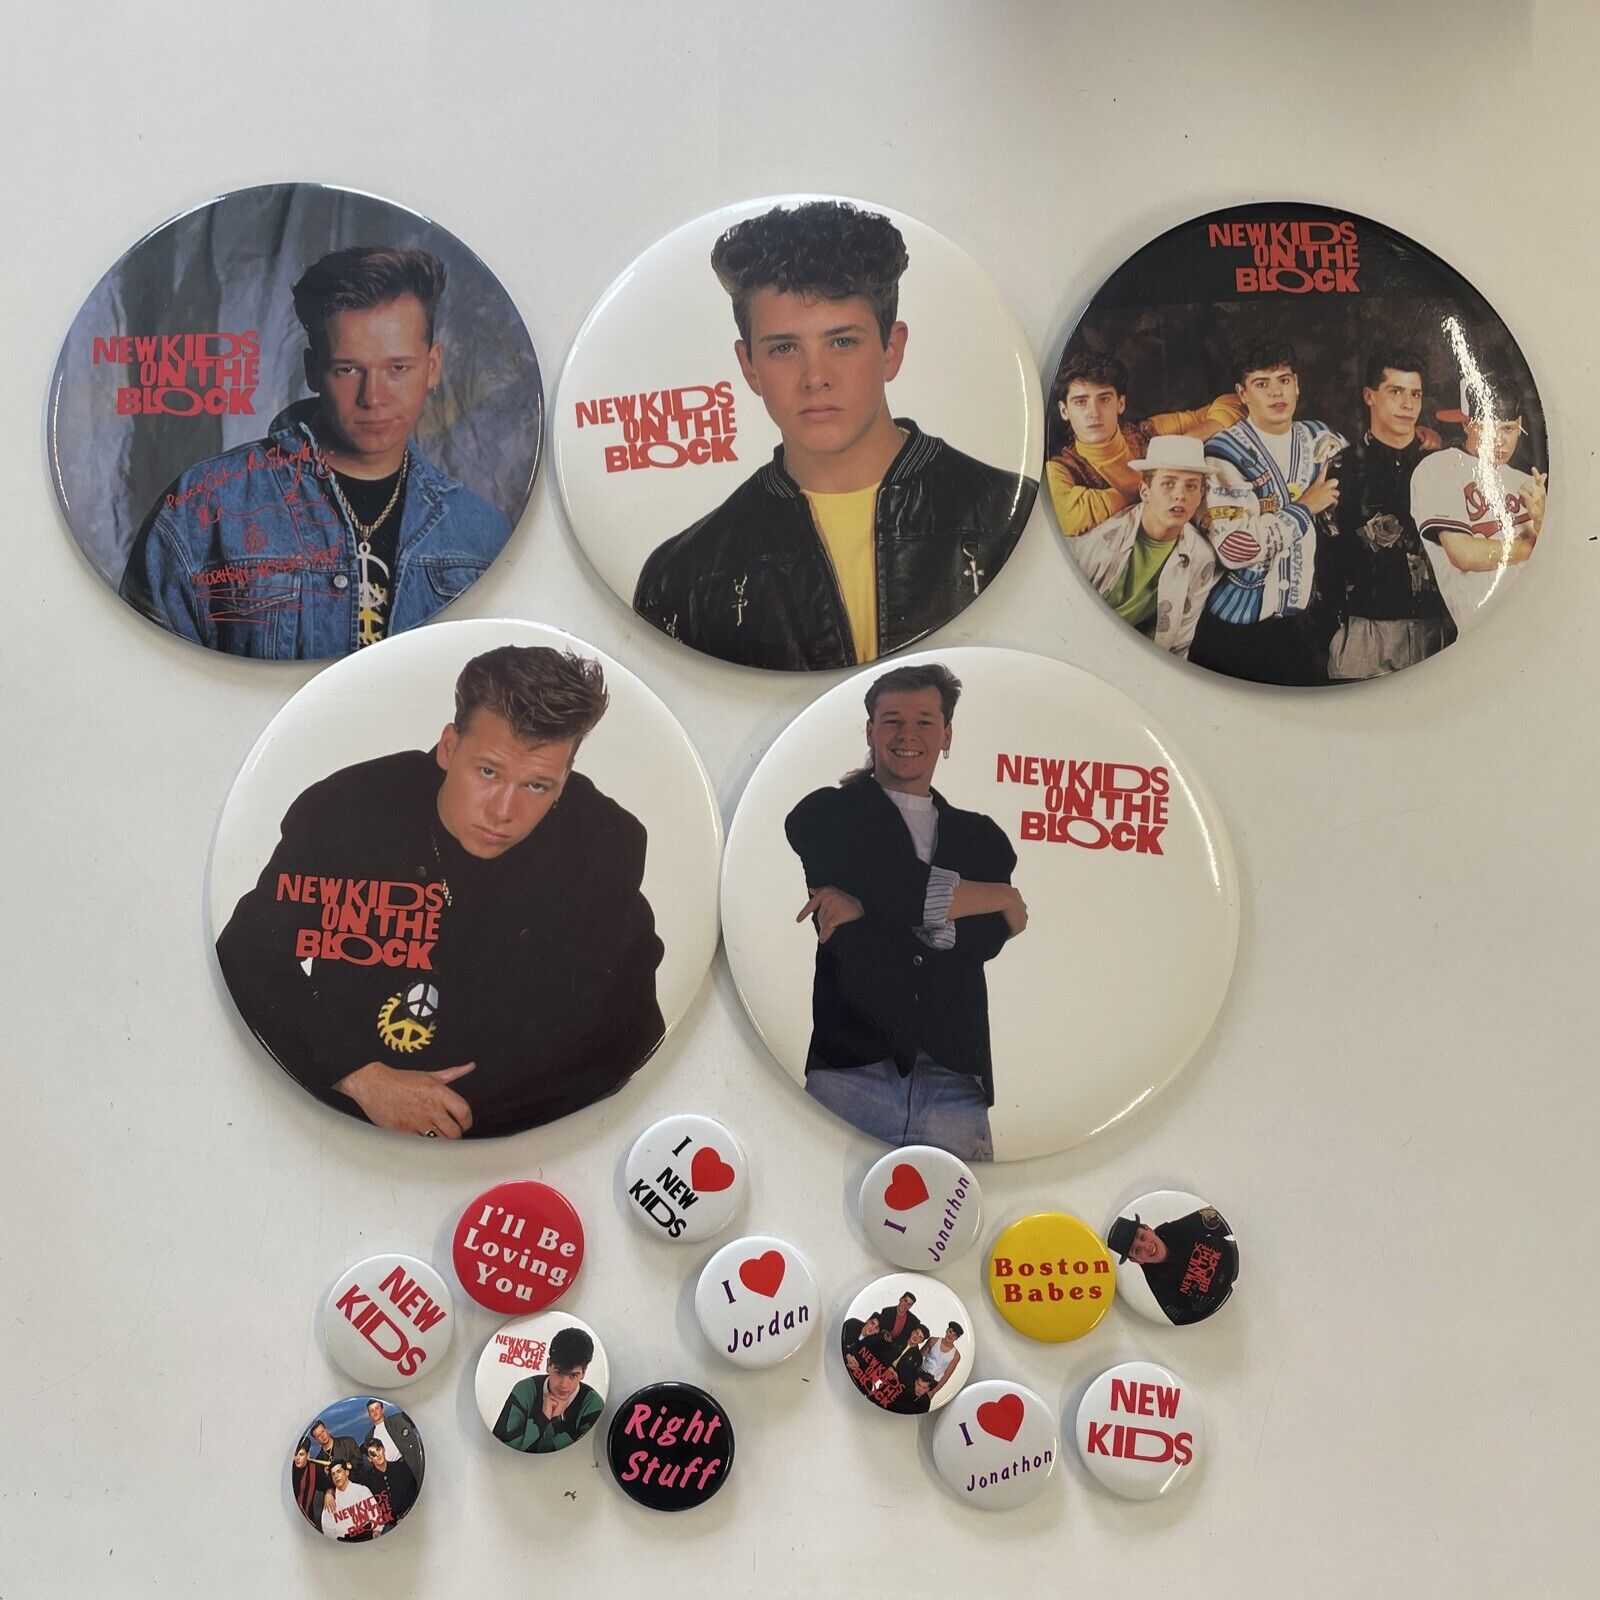 New Kids on the Block Pin Buttons Lot Of 5 NKOTB  6 Inch + 13 1” Pins